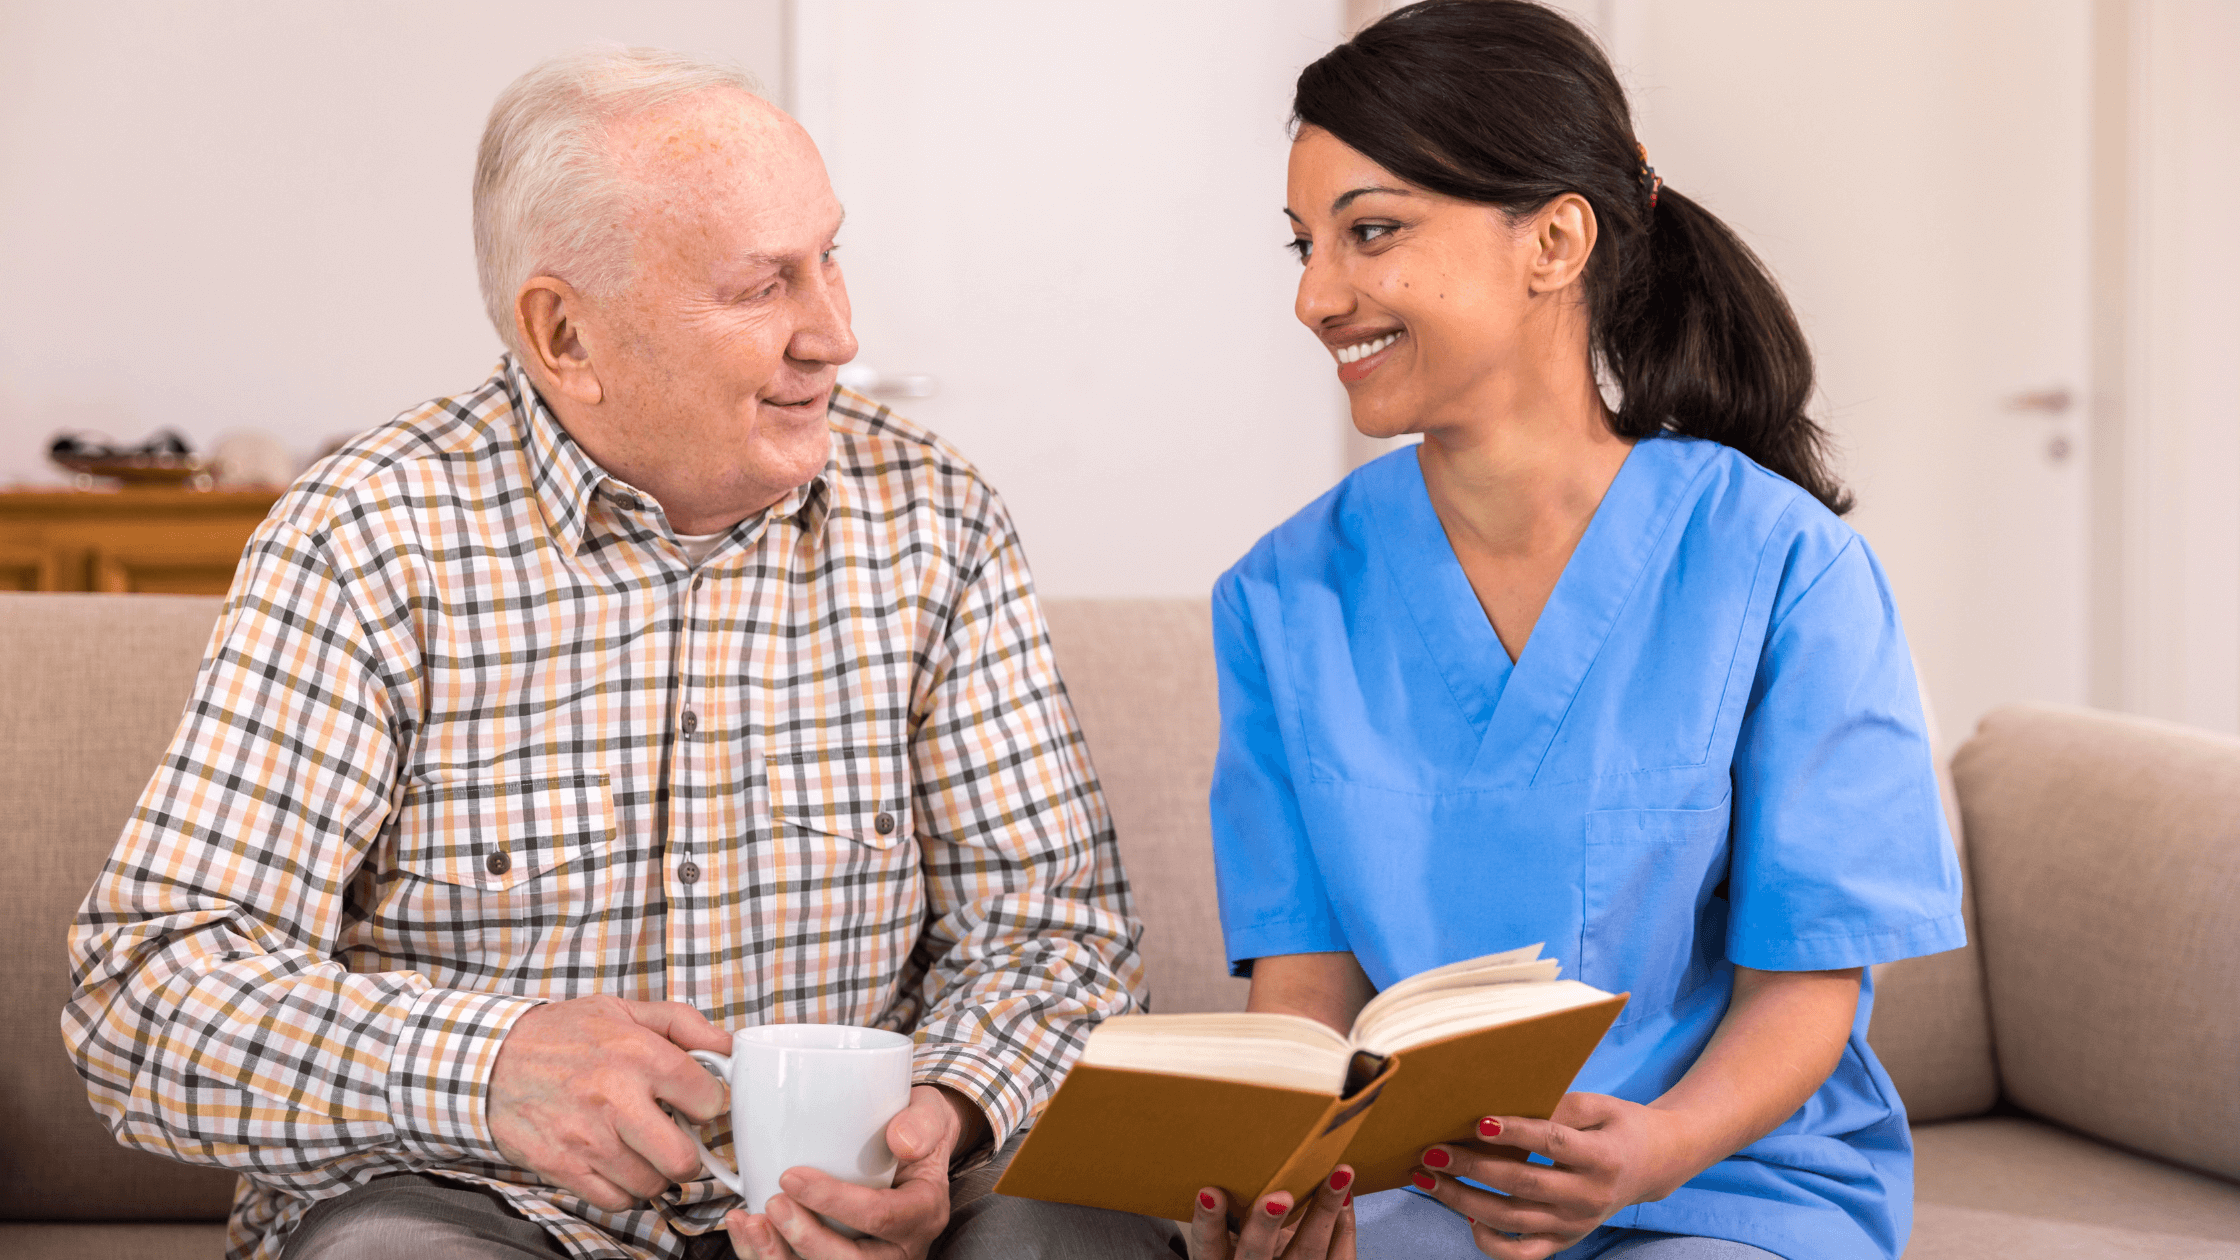 Female caregiver on uniform holding a book with senior male patient holding mug sitting on couch